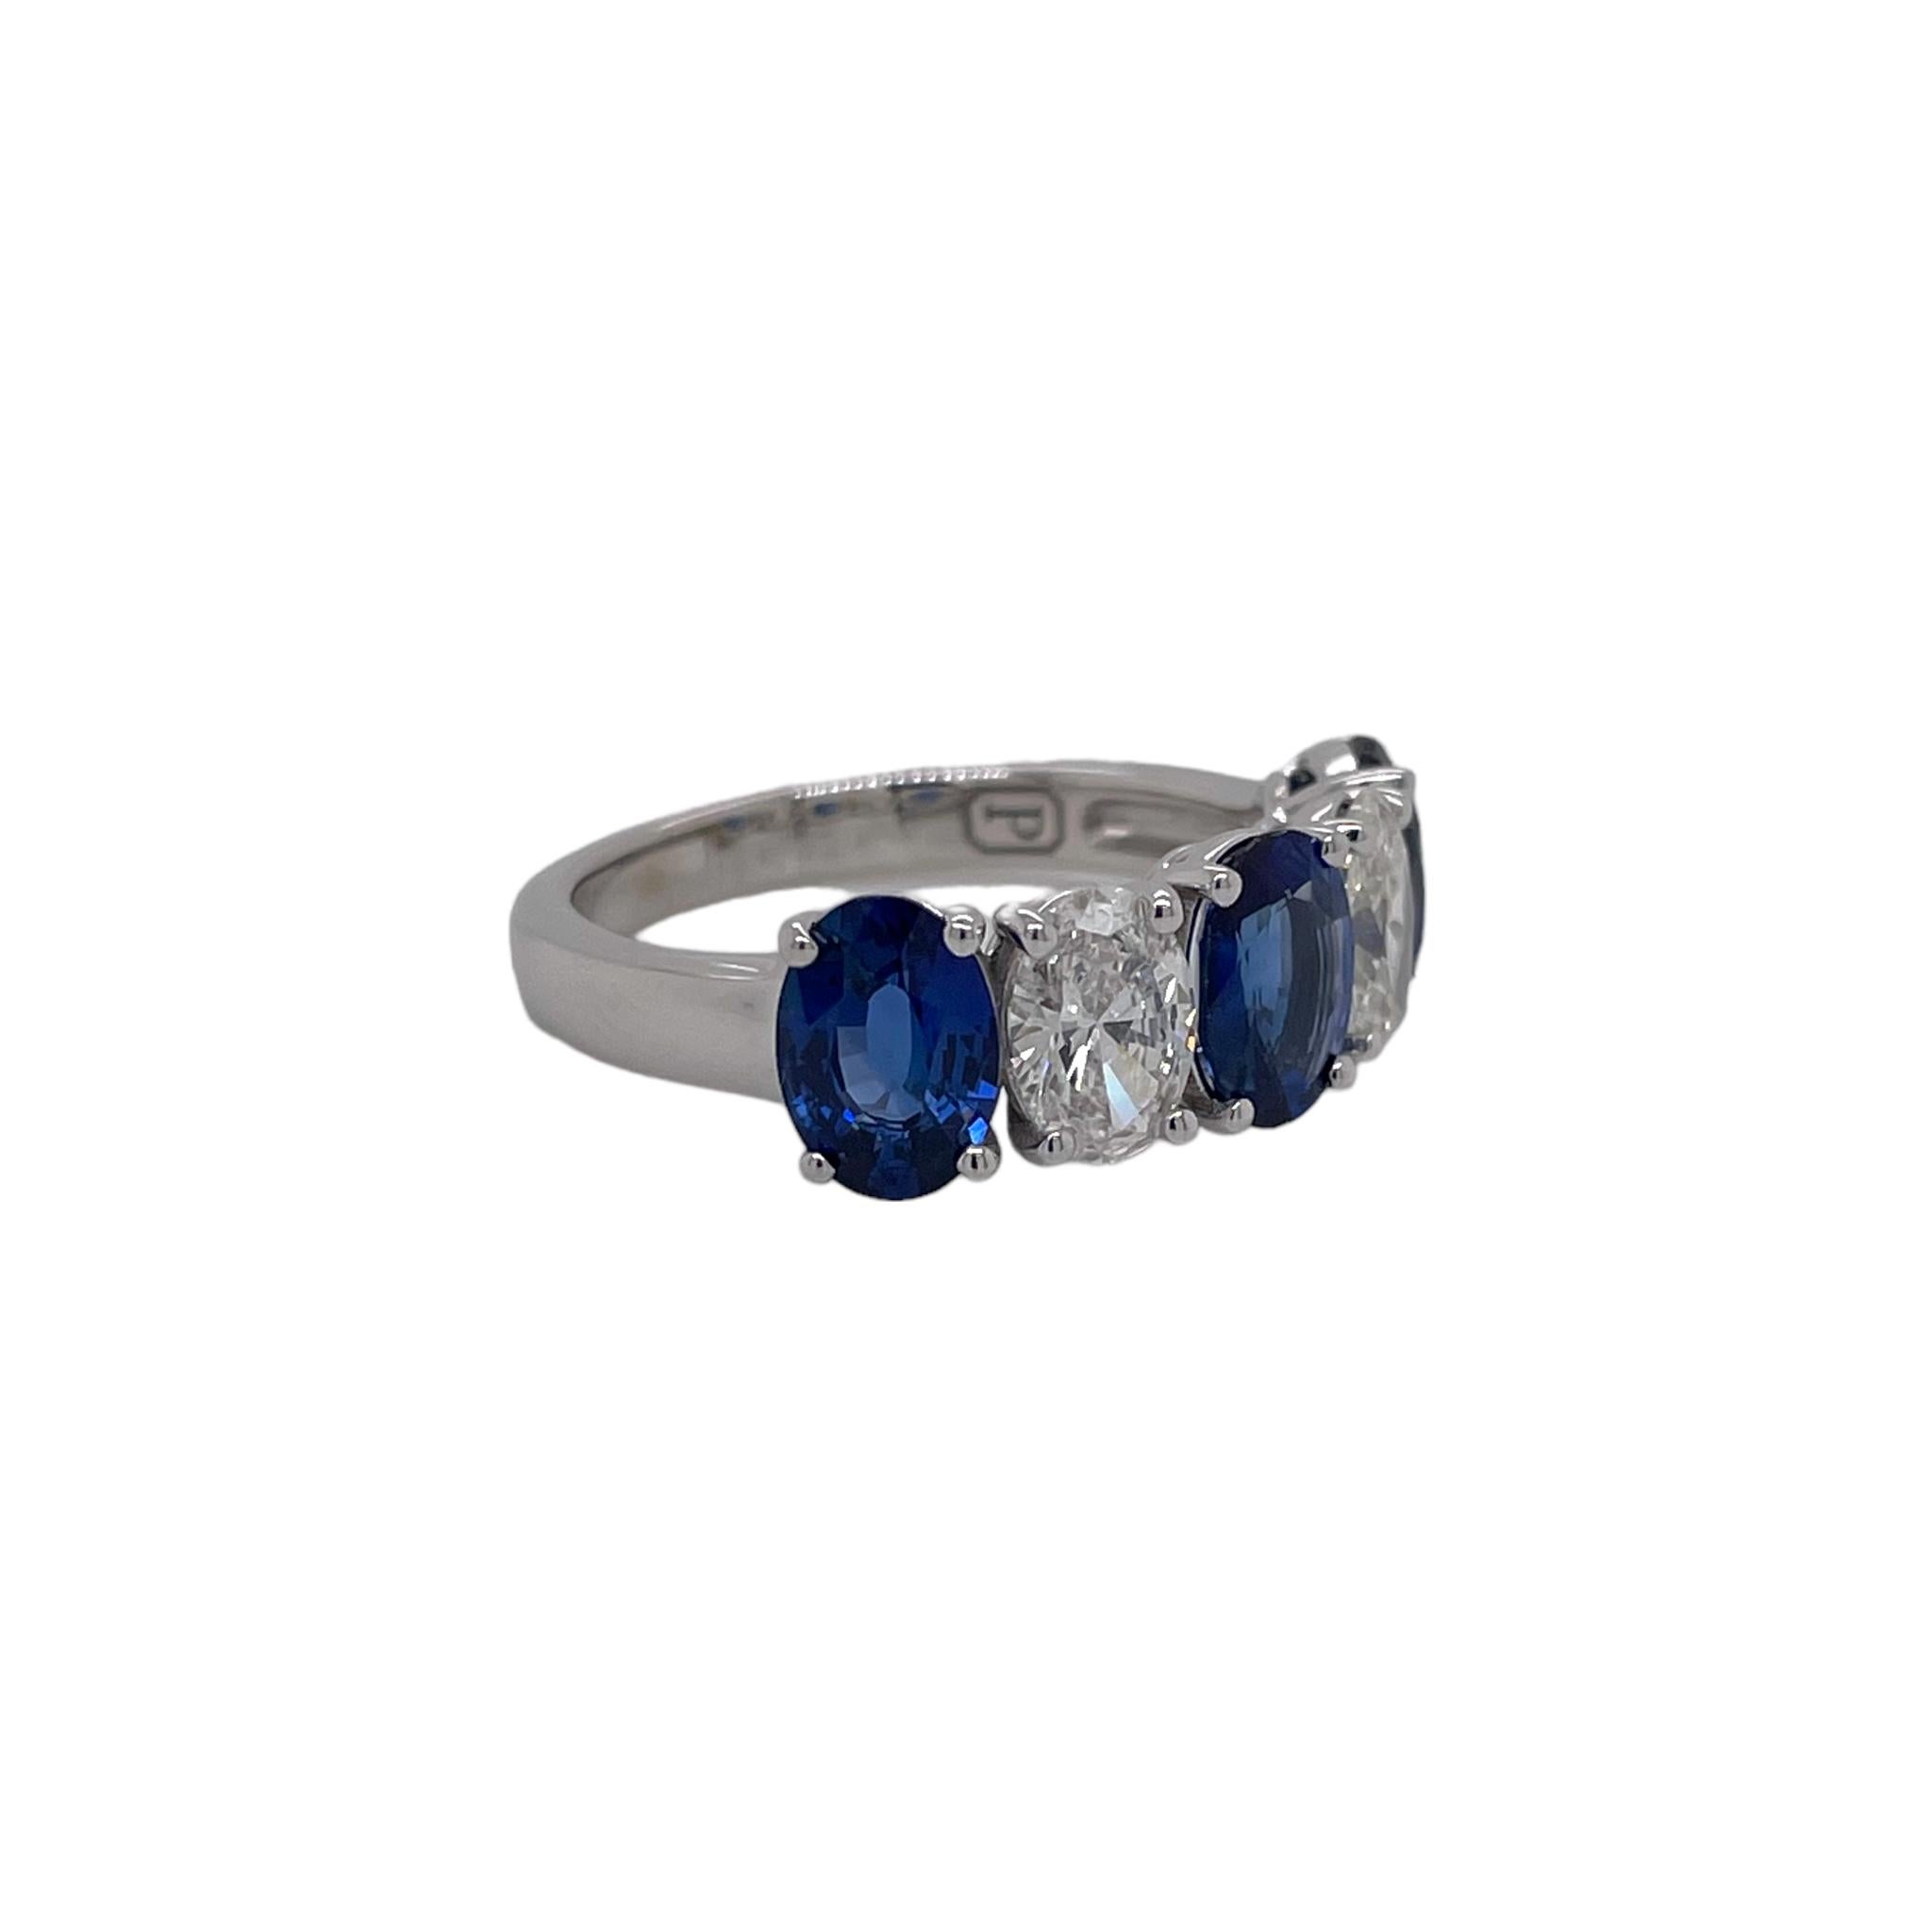 Ring contains 3 oval brilliant sapphires, 2.70tcw and 2 oval brilliant diamonds, 1.03tcw. Diamonds are F in color and VS2 in clarity. All stones are mounted in basket prong settings. Ring is a size 6.75 and can be resized to desired measurement.